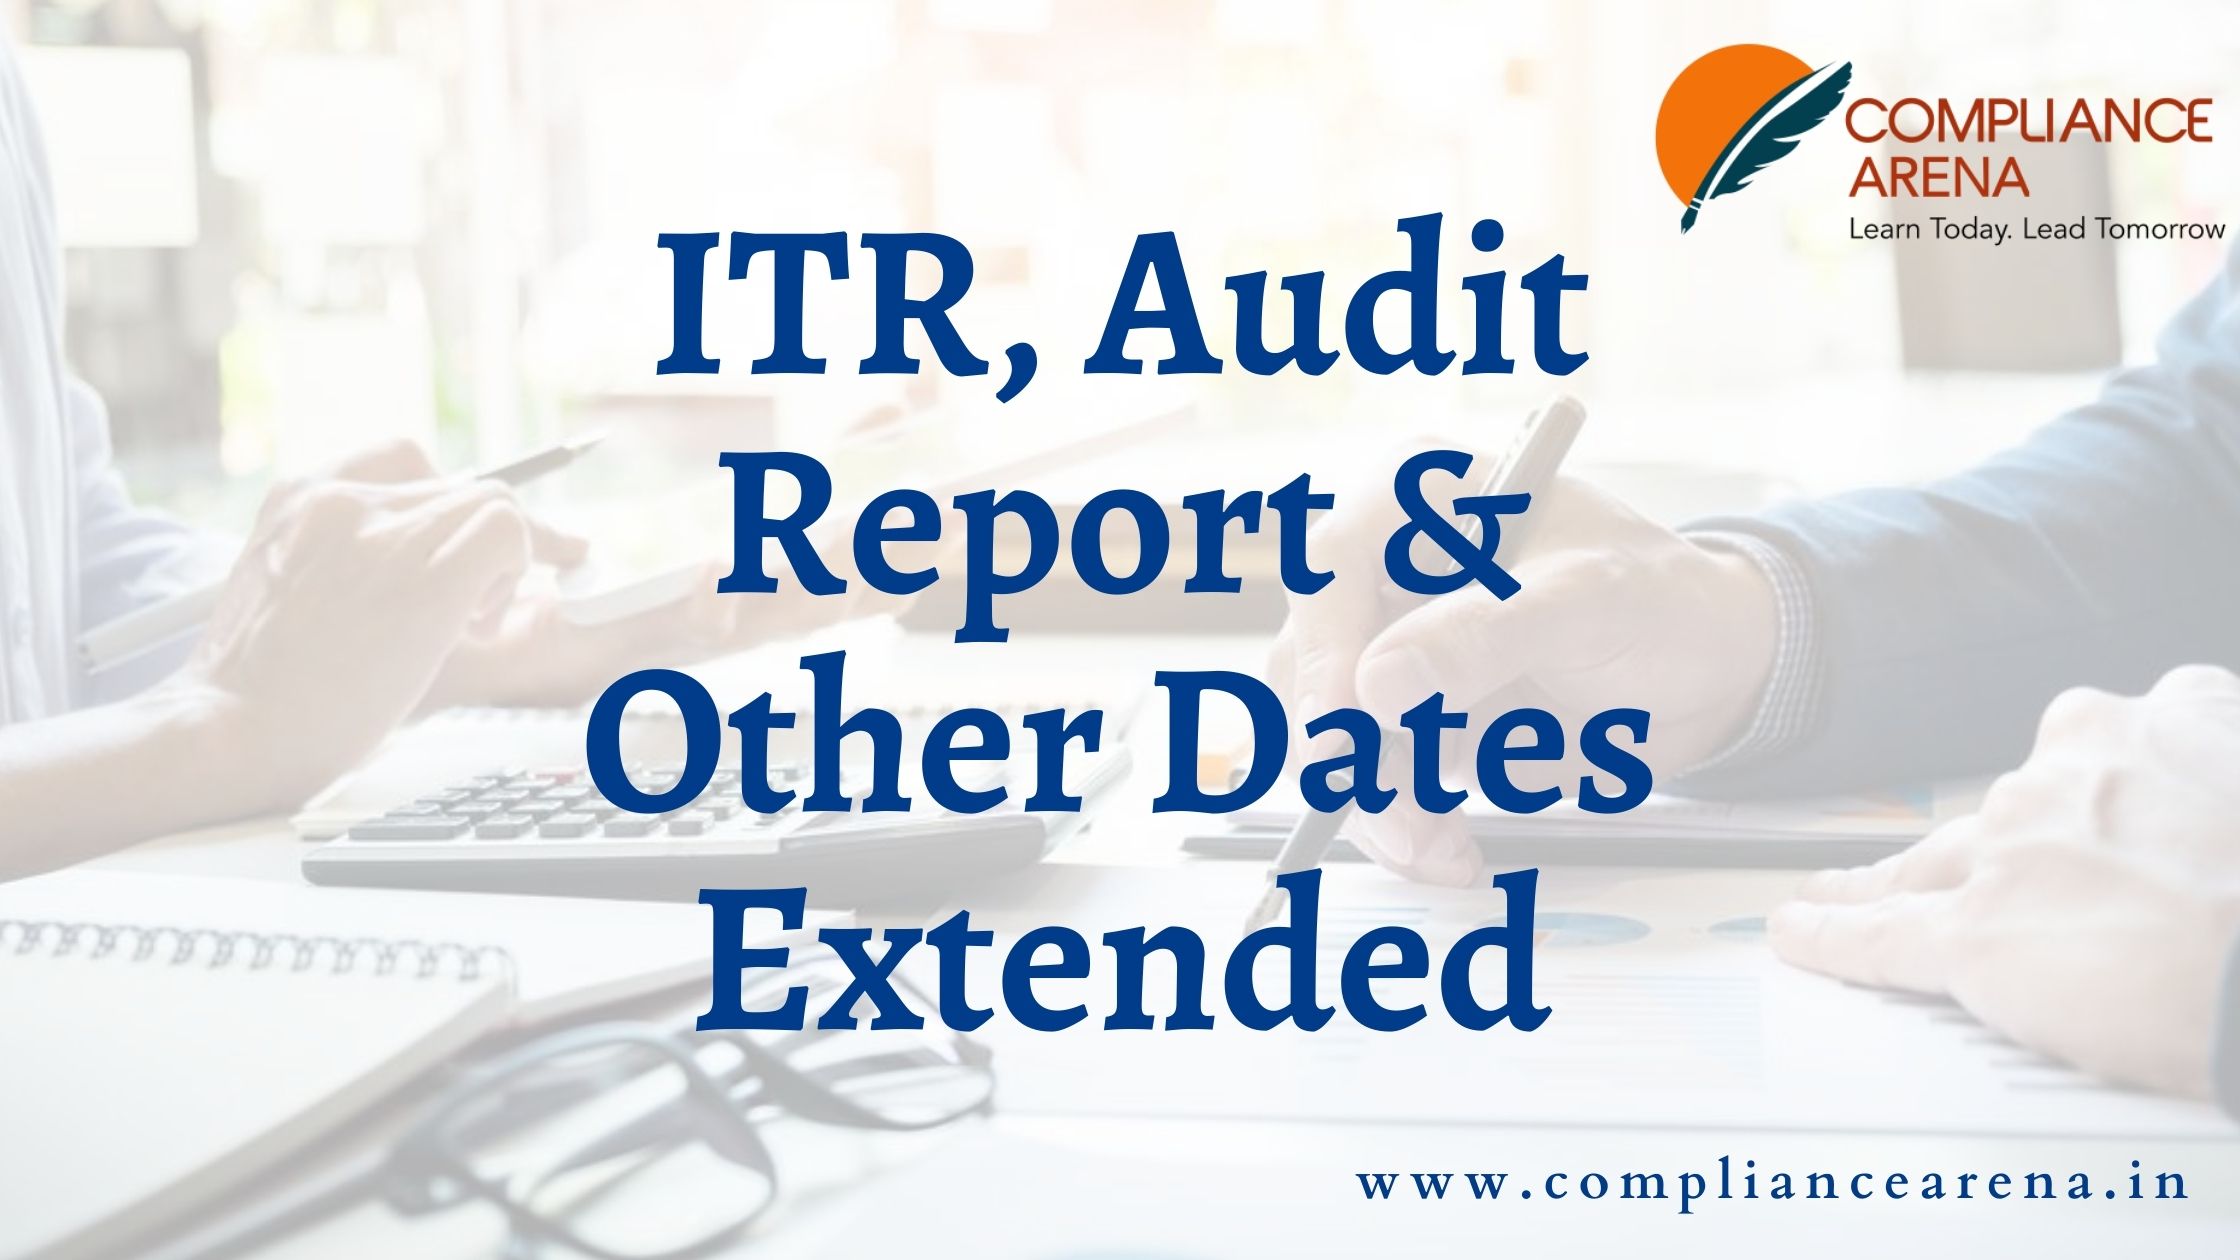 ITR, Audit Report & Other Dates Extended